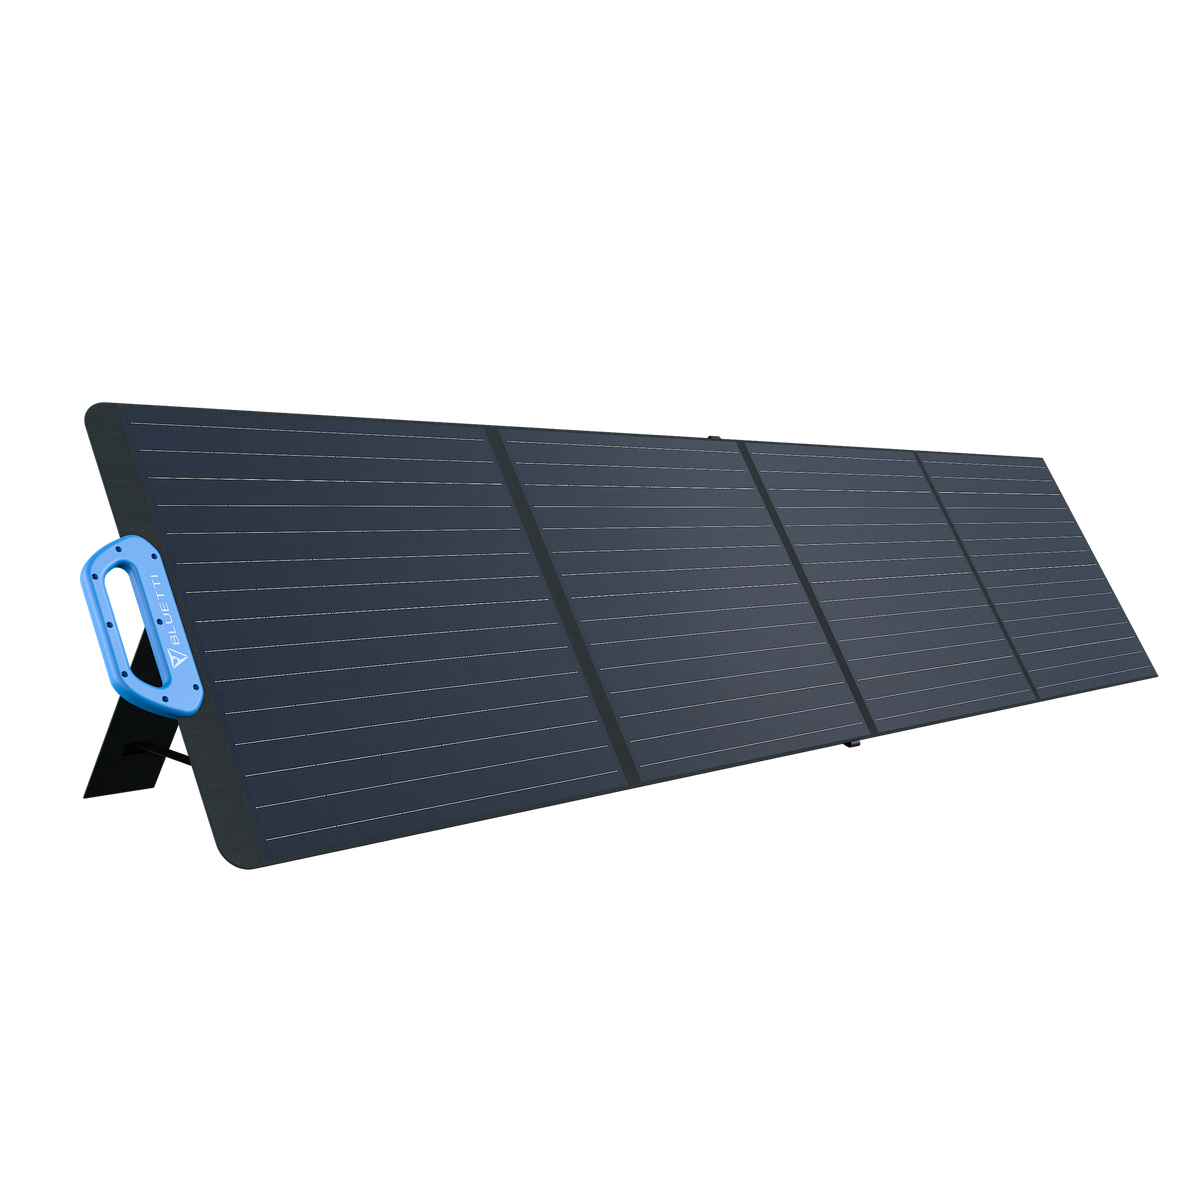 200W Portable Interest Free Solar Panels With Thin Film And Flexible Design  Magic Black Folding Monocrystalline Panel For Photovoltaic Applications CE  Certified From Cnpisen, $145.73